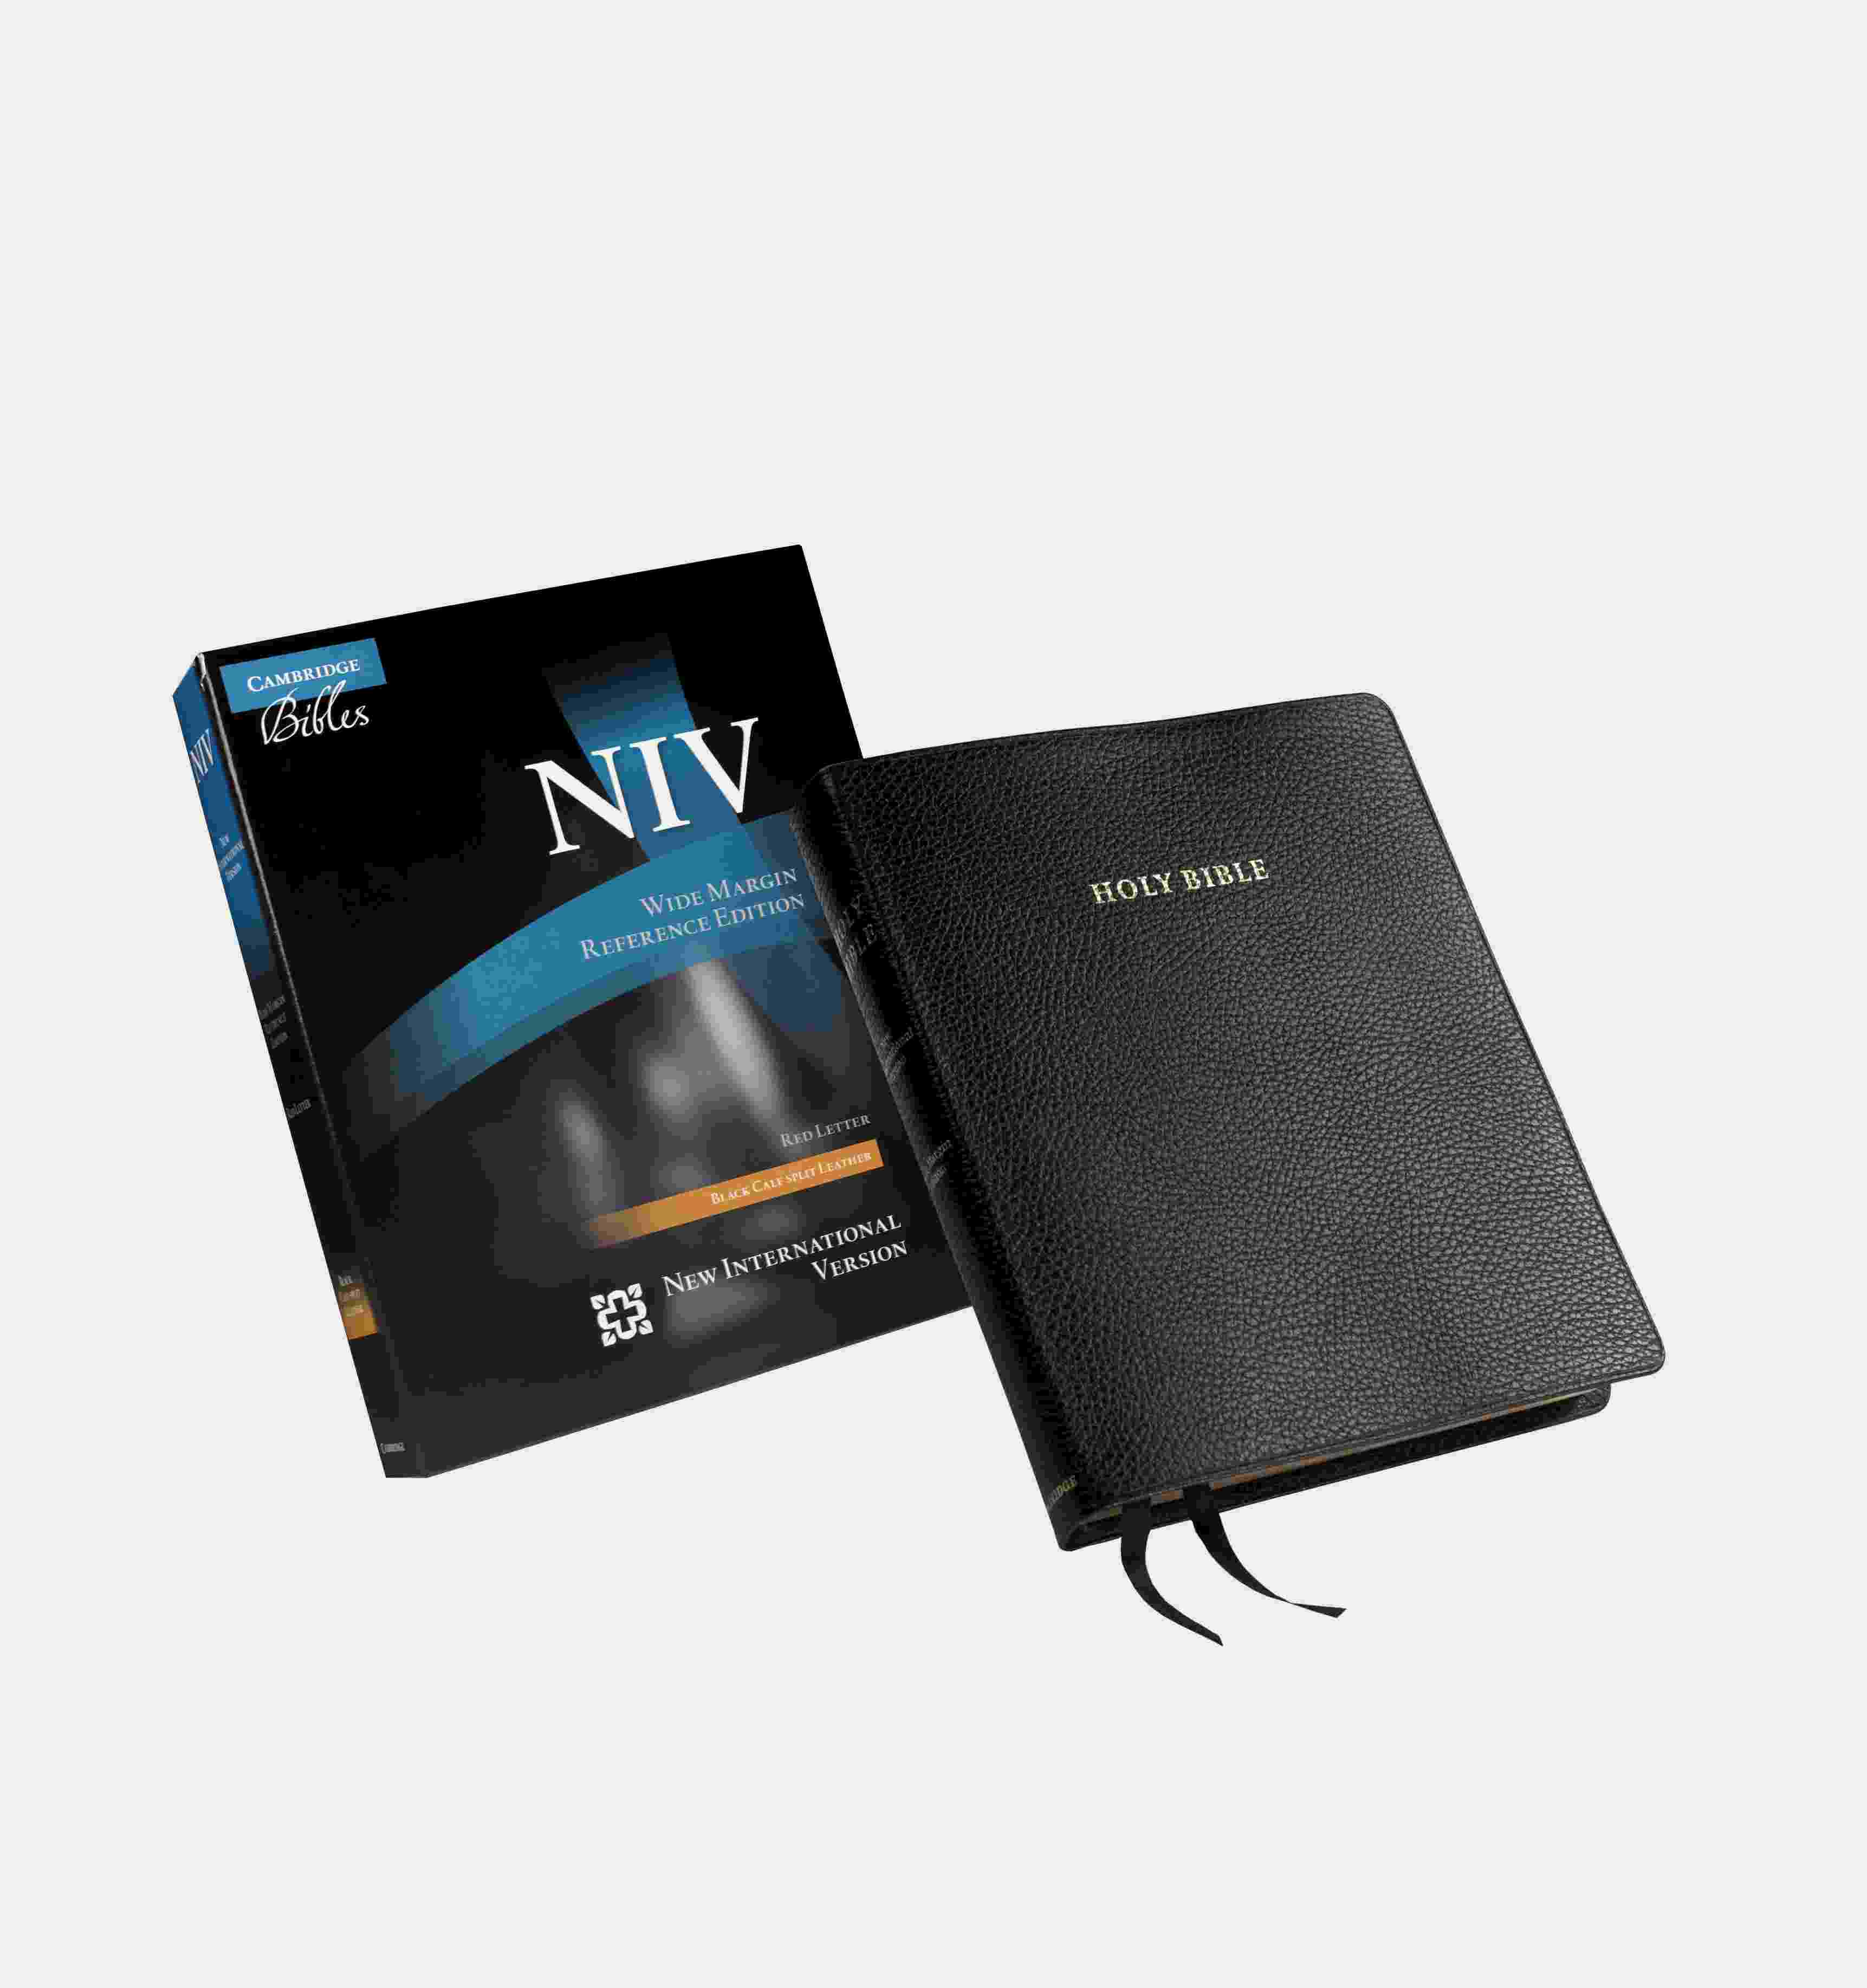 Black leather Bible and box